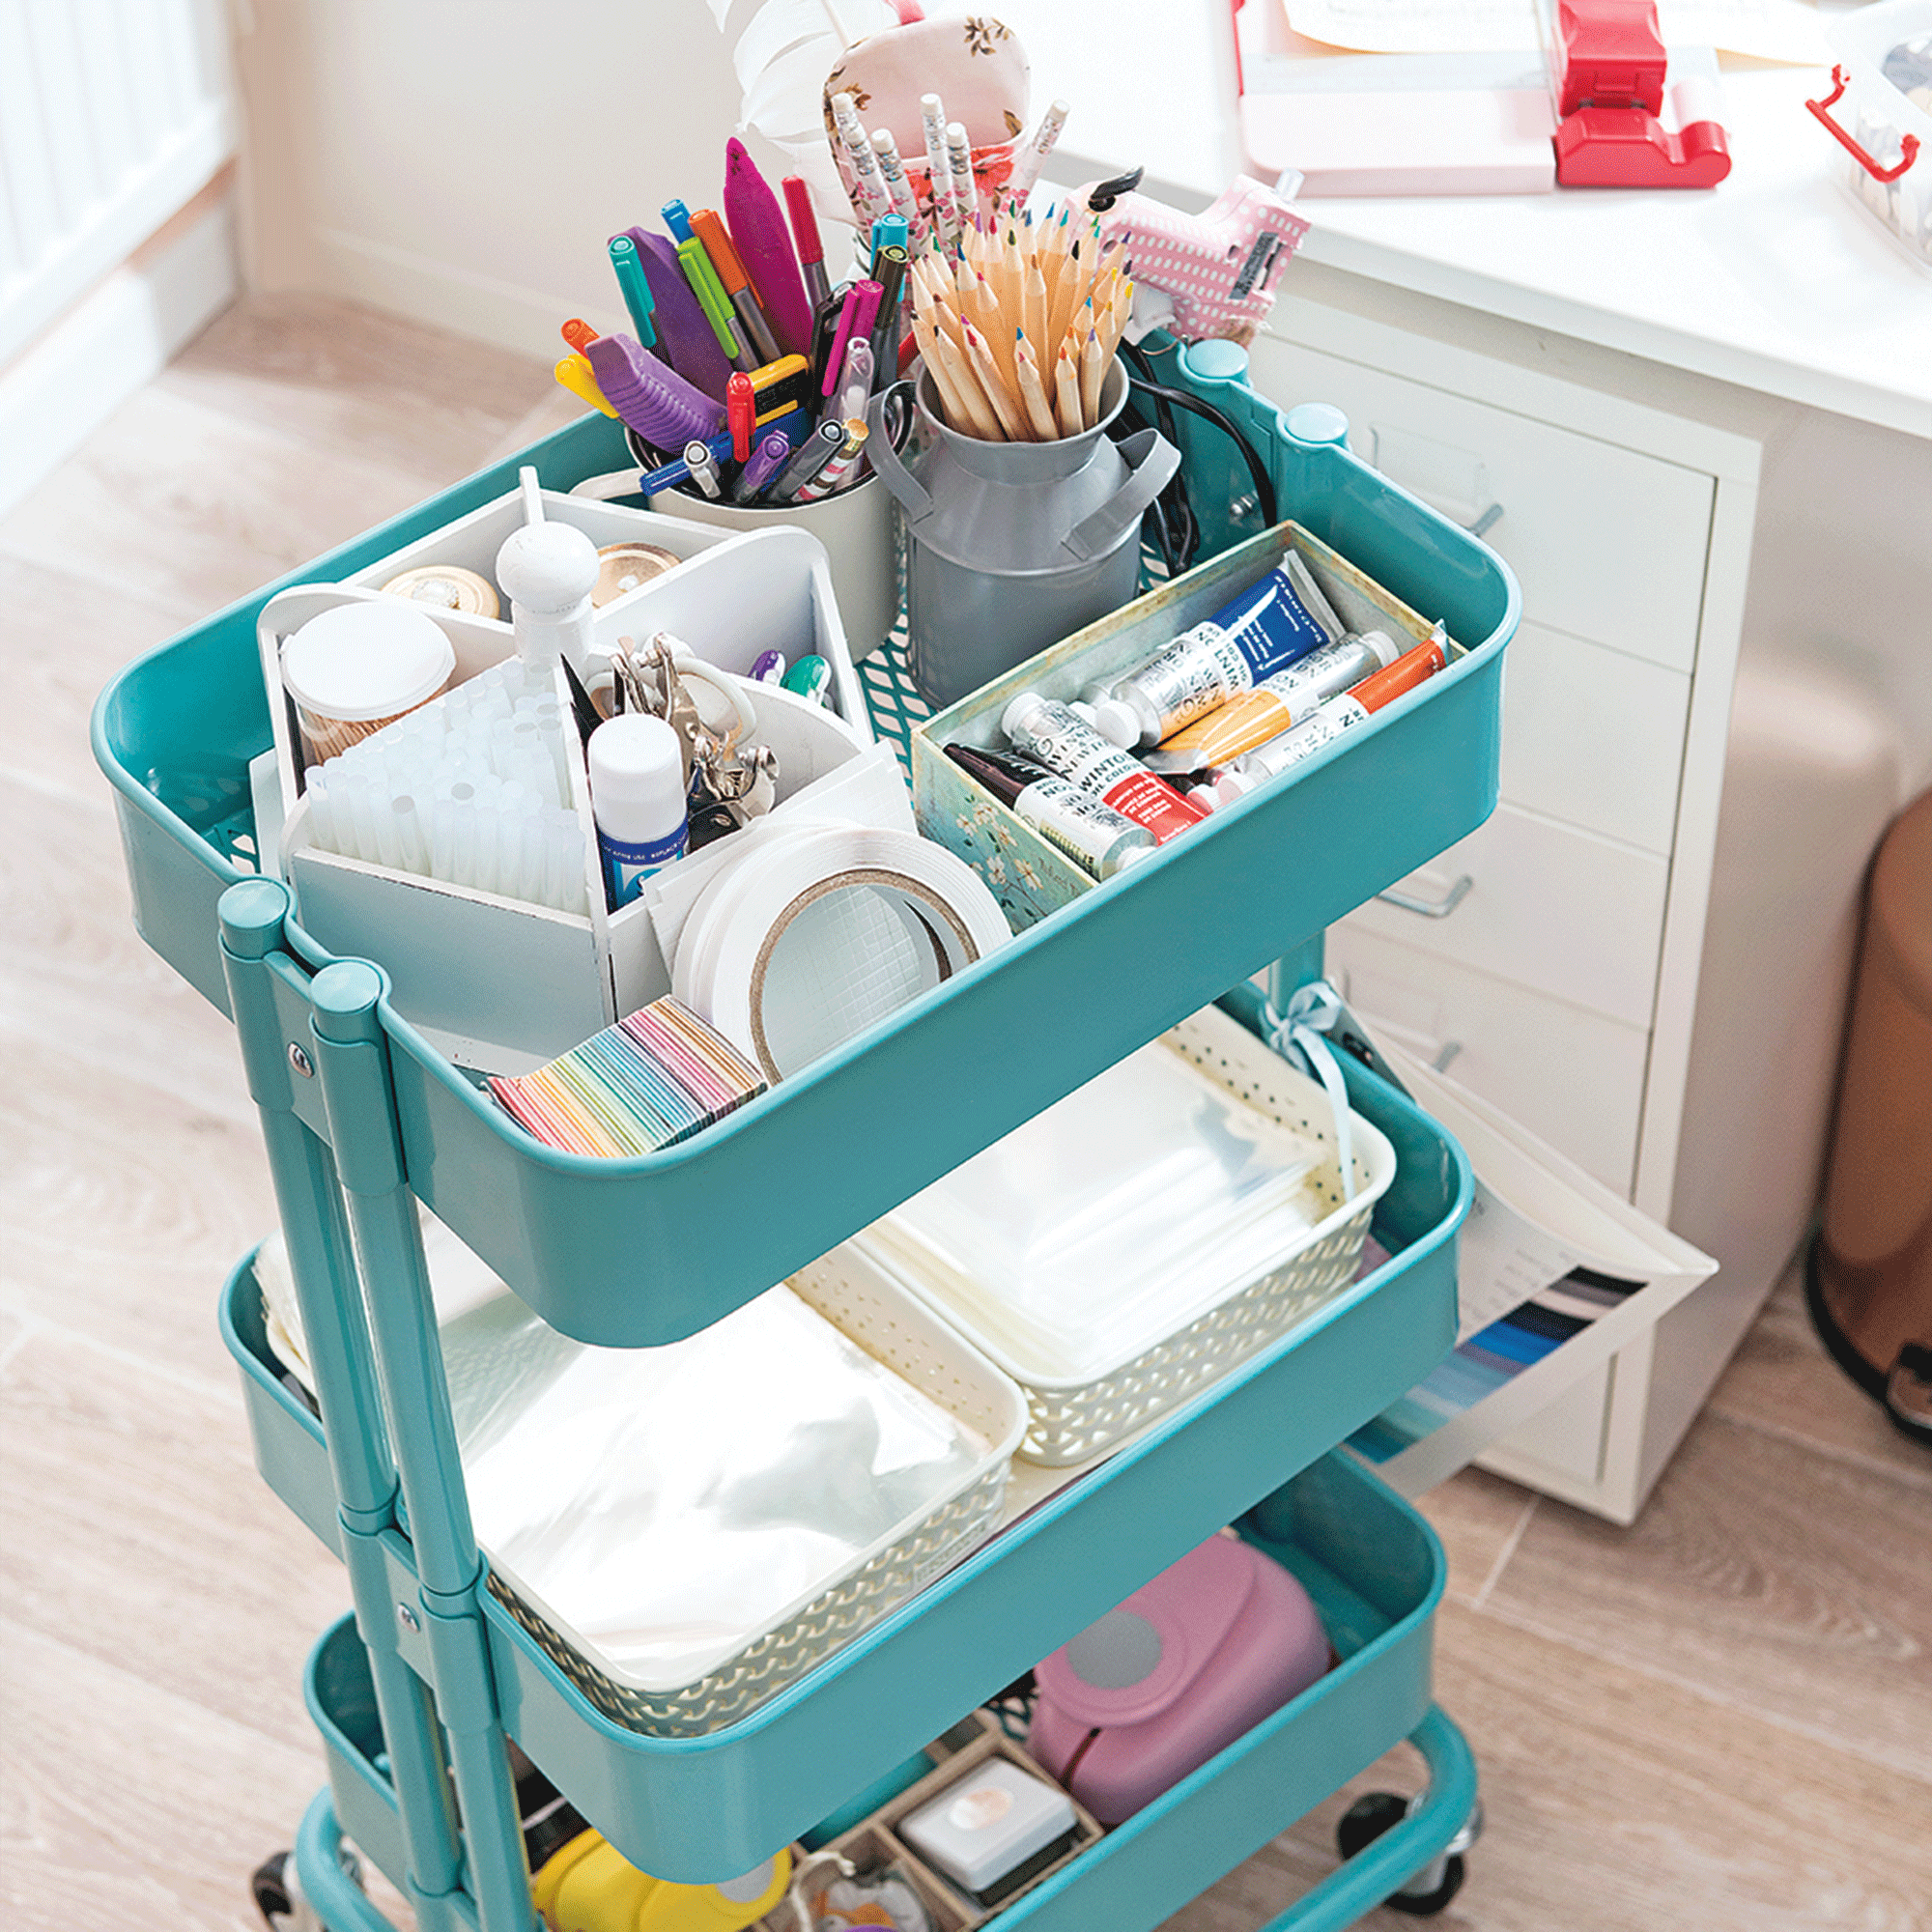 Turquoise trolley